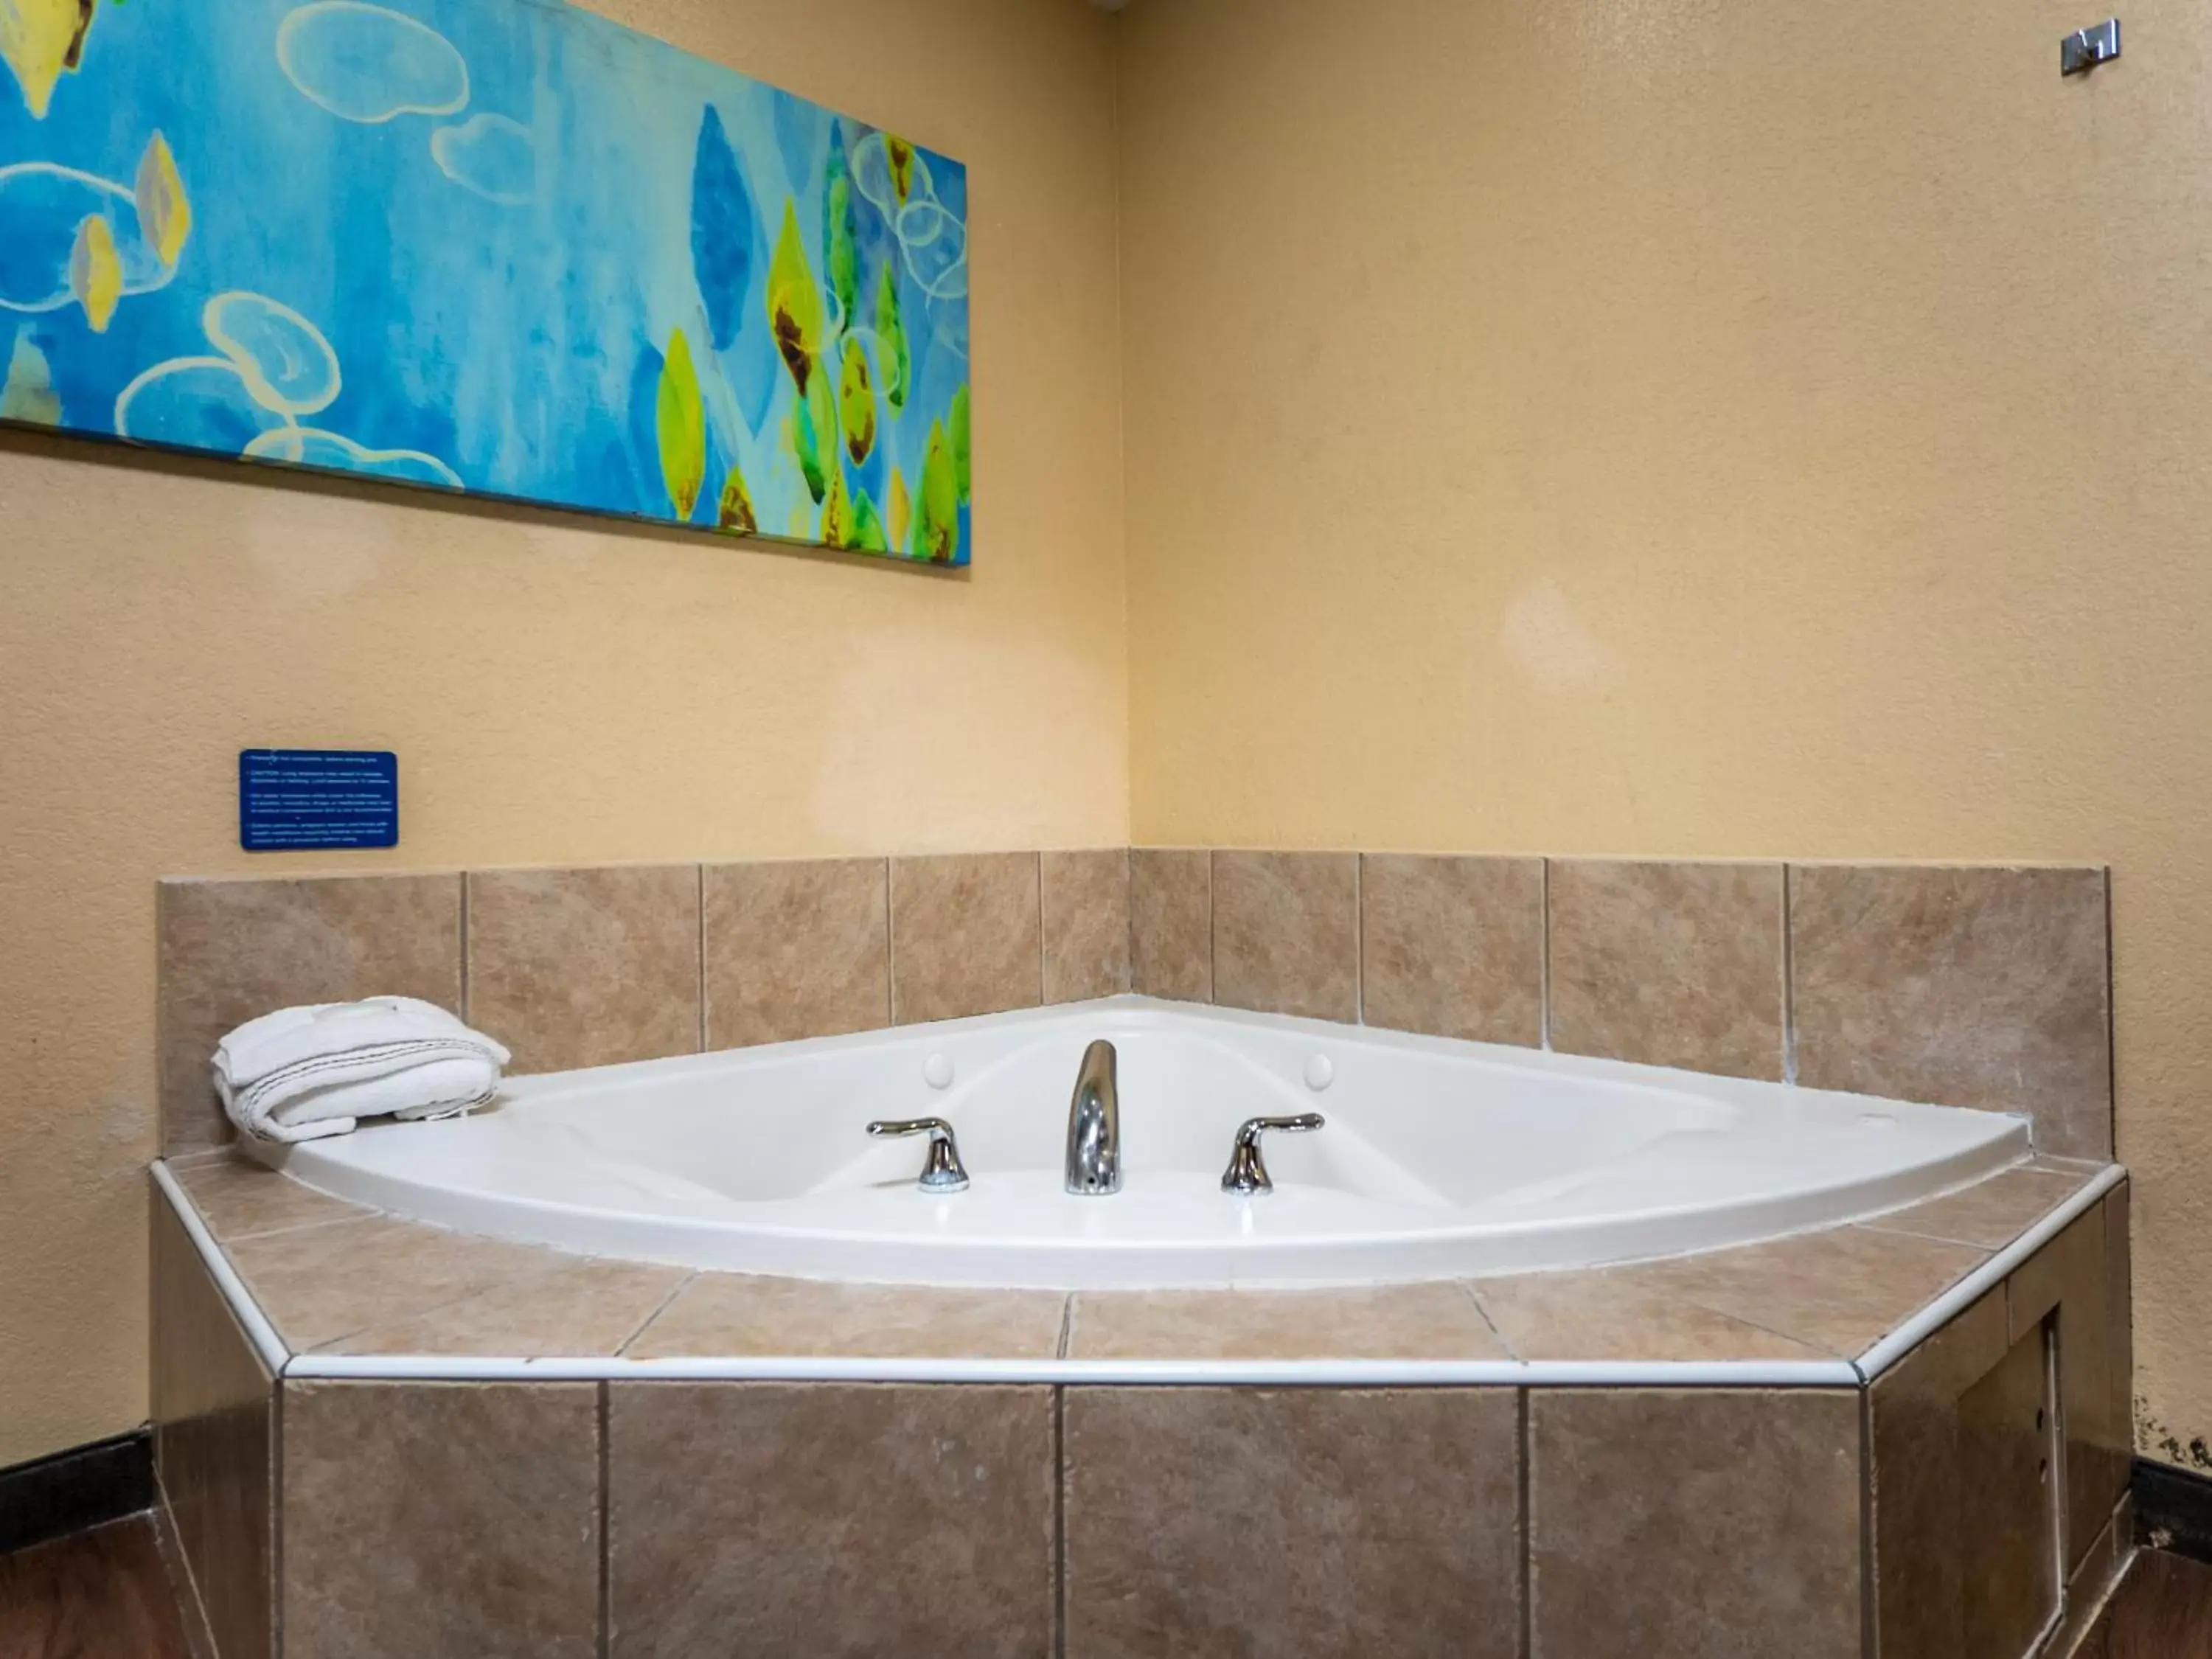 Hot Tub, Bathroom in Microtel Inn and Suites Ocala